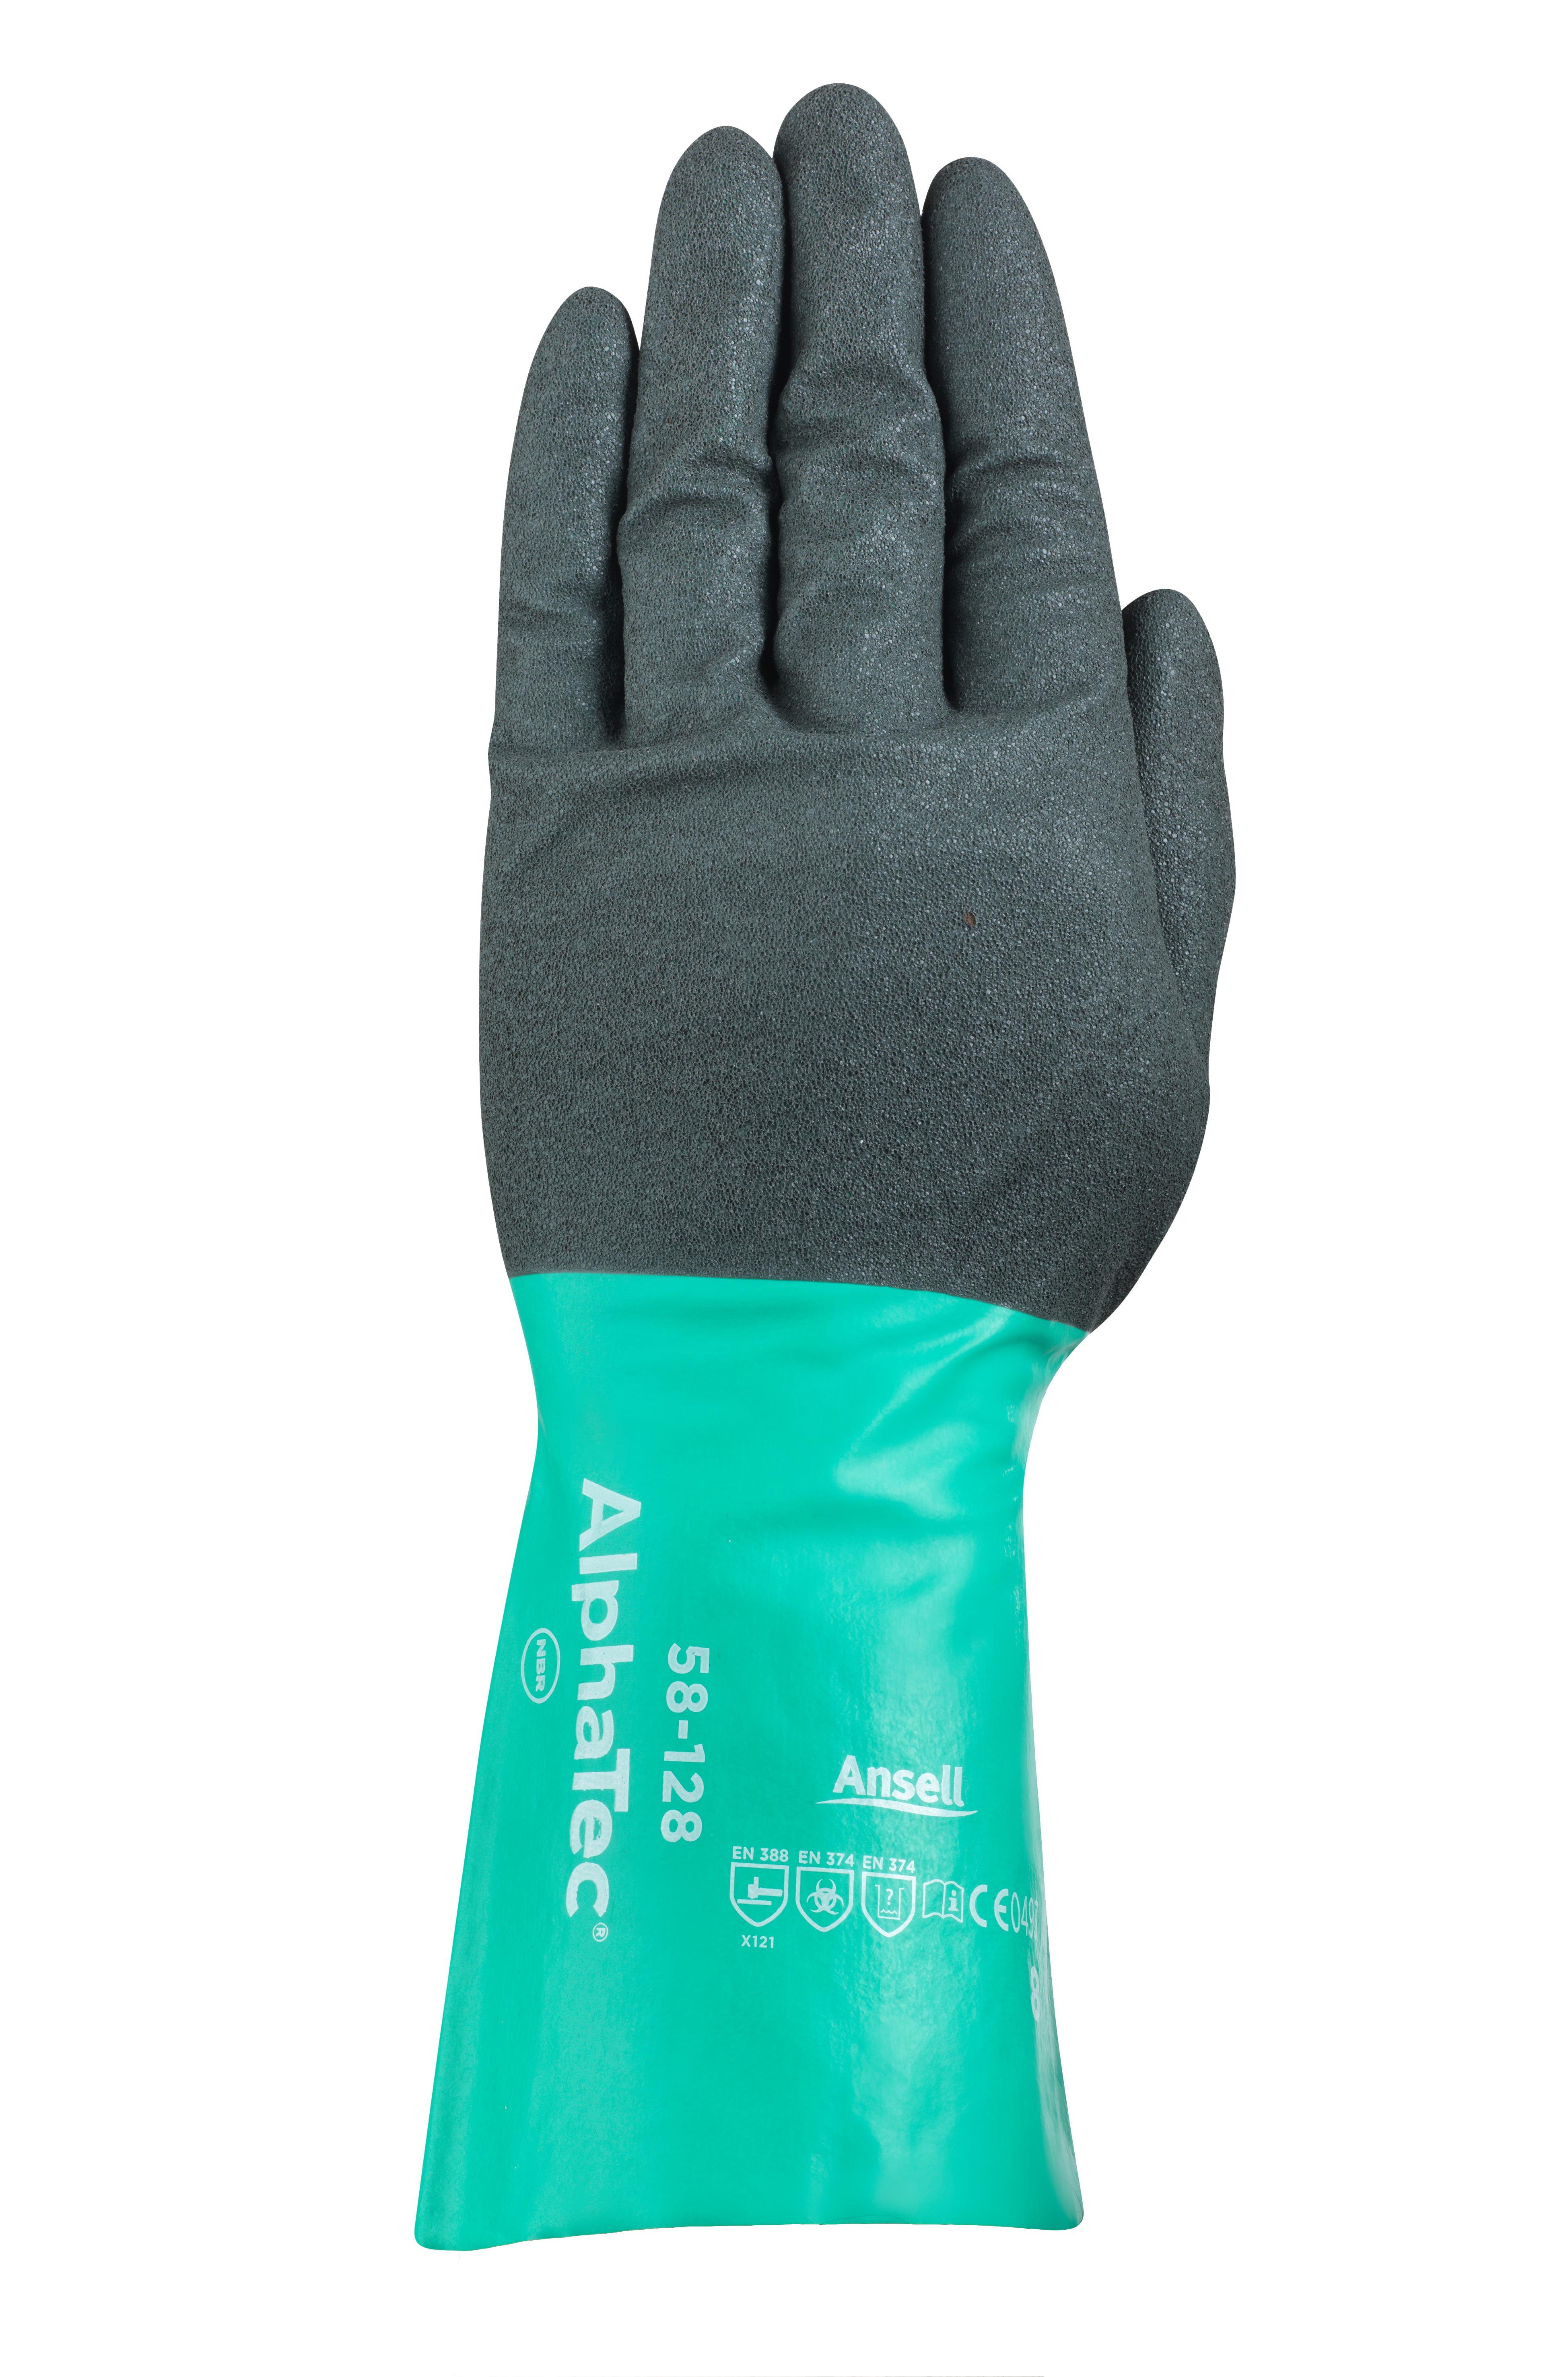 ANSELL ALPHATEC 58-128 LT DUTY NITRILE - Chemical Resistant Gloves